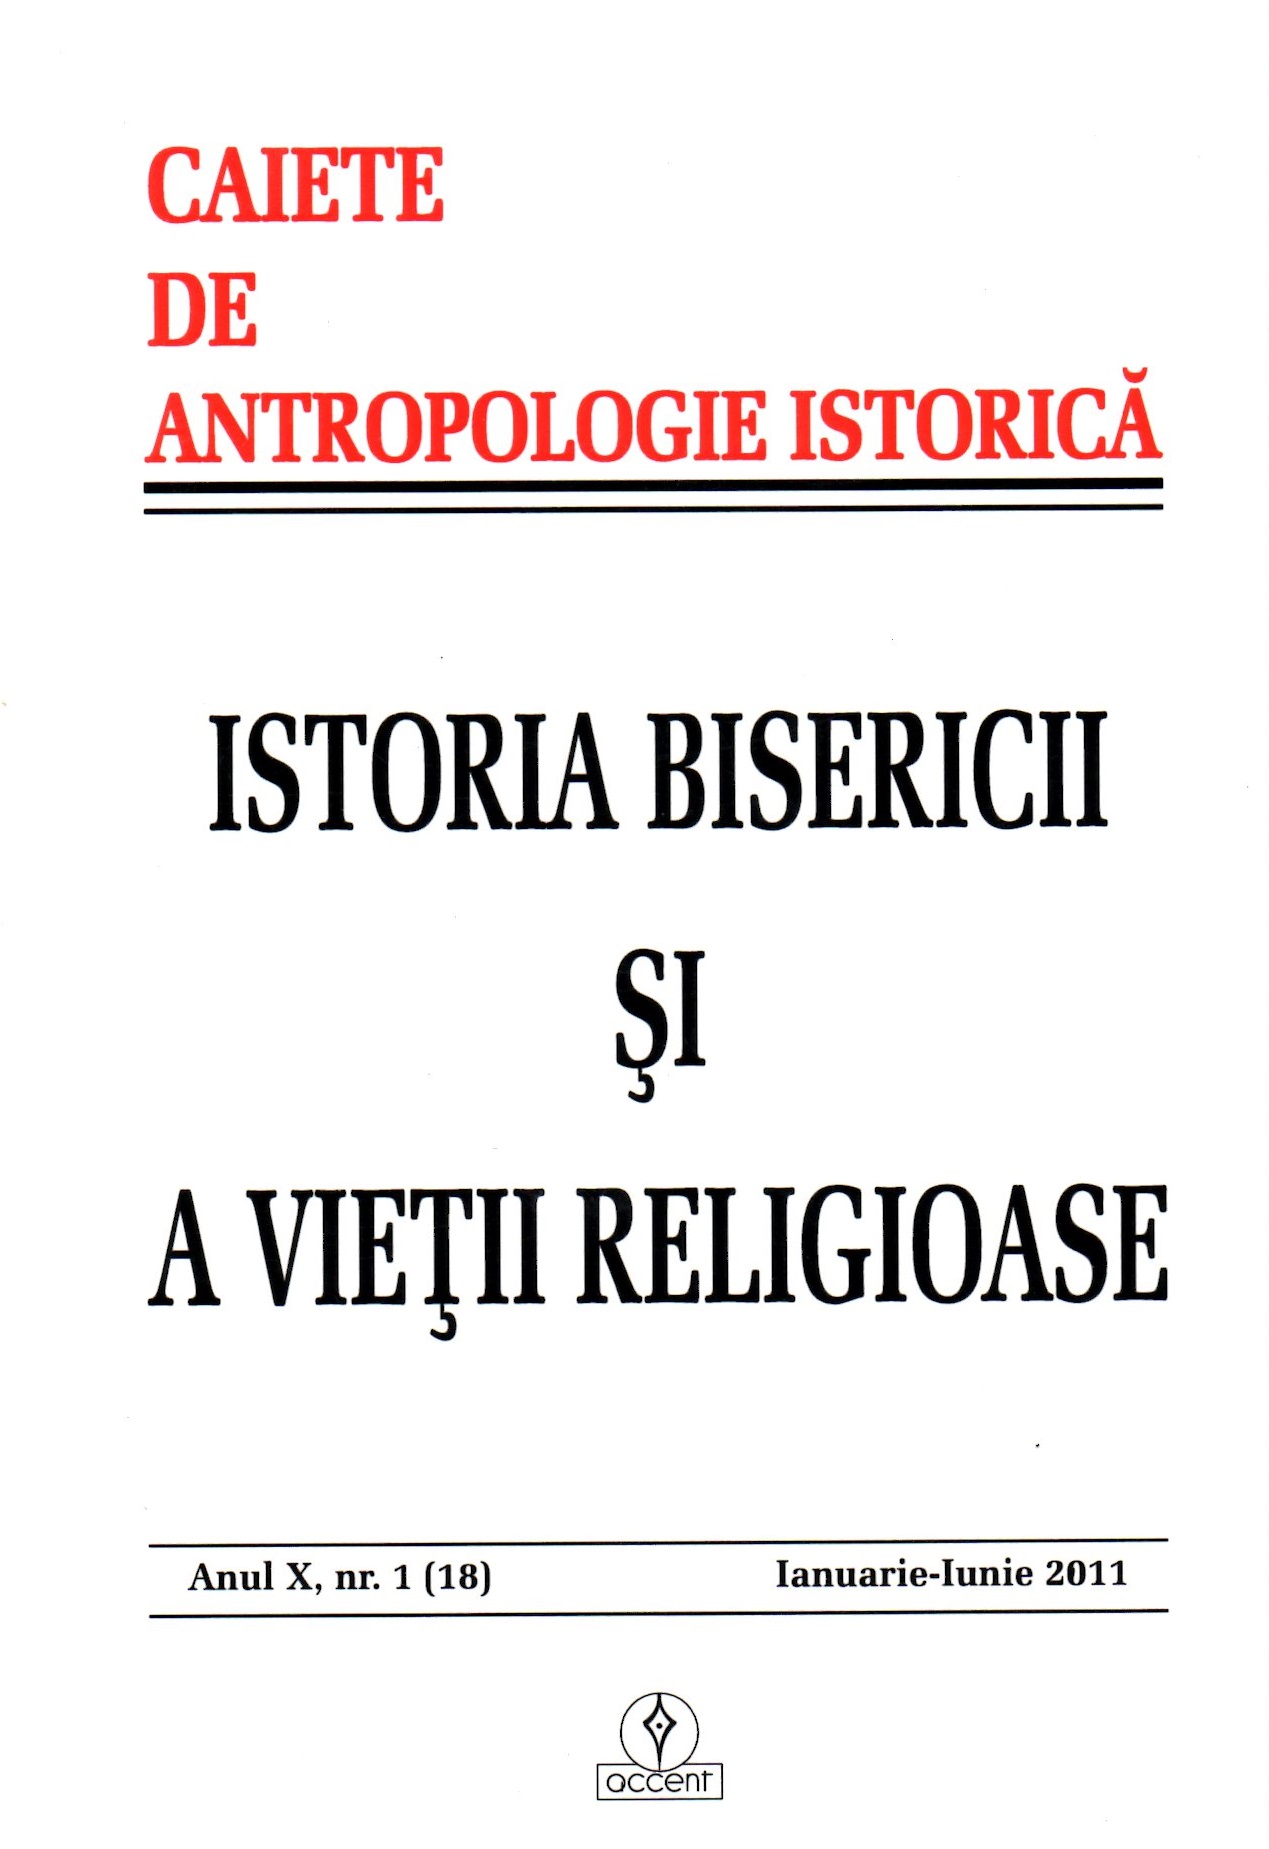 Autocephaly and Patriarchate in the Reflections of Bartolomeu Stănescu (1875-1954), Bishop of Râmnic Noul Severin Cover Image